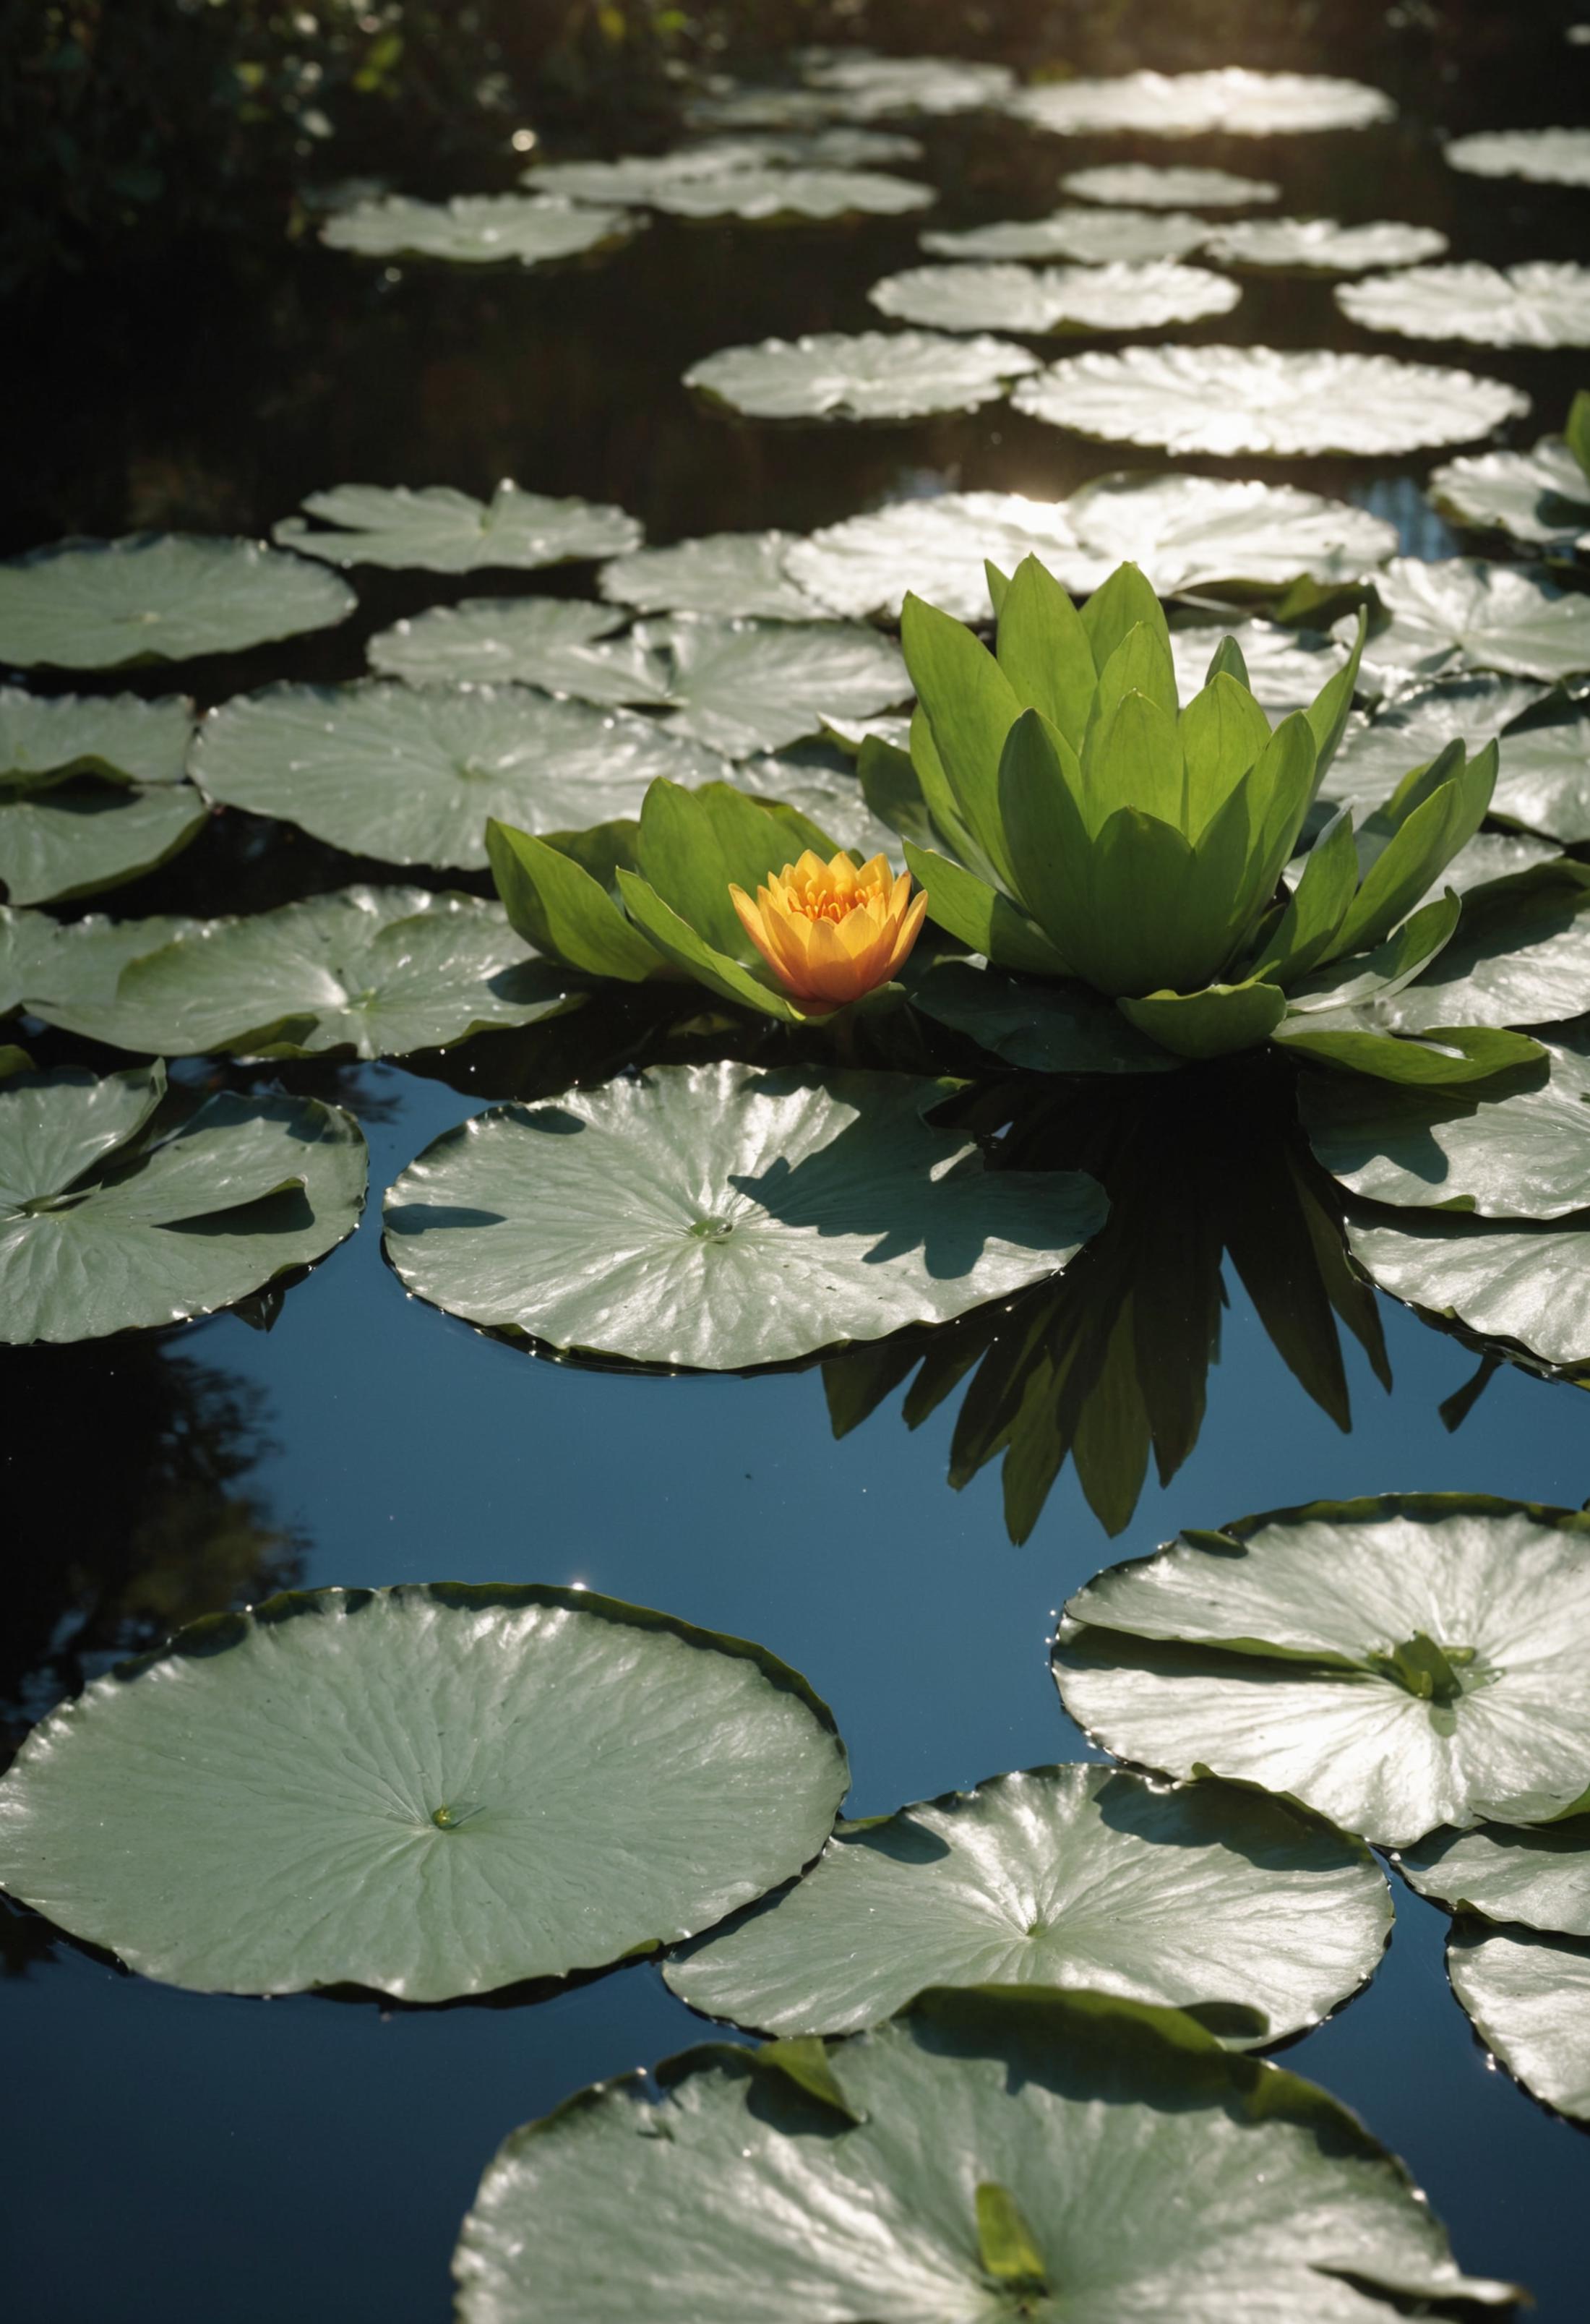 A beautiful pond with a yellow flower in the middle of a lily pad.